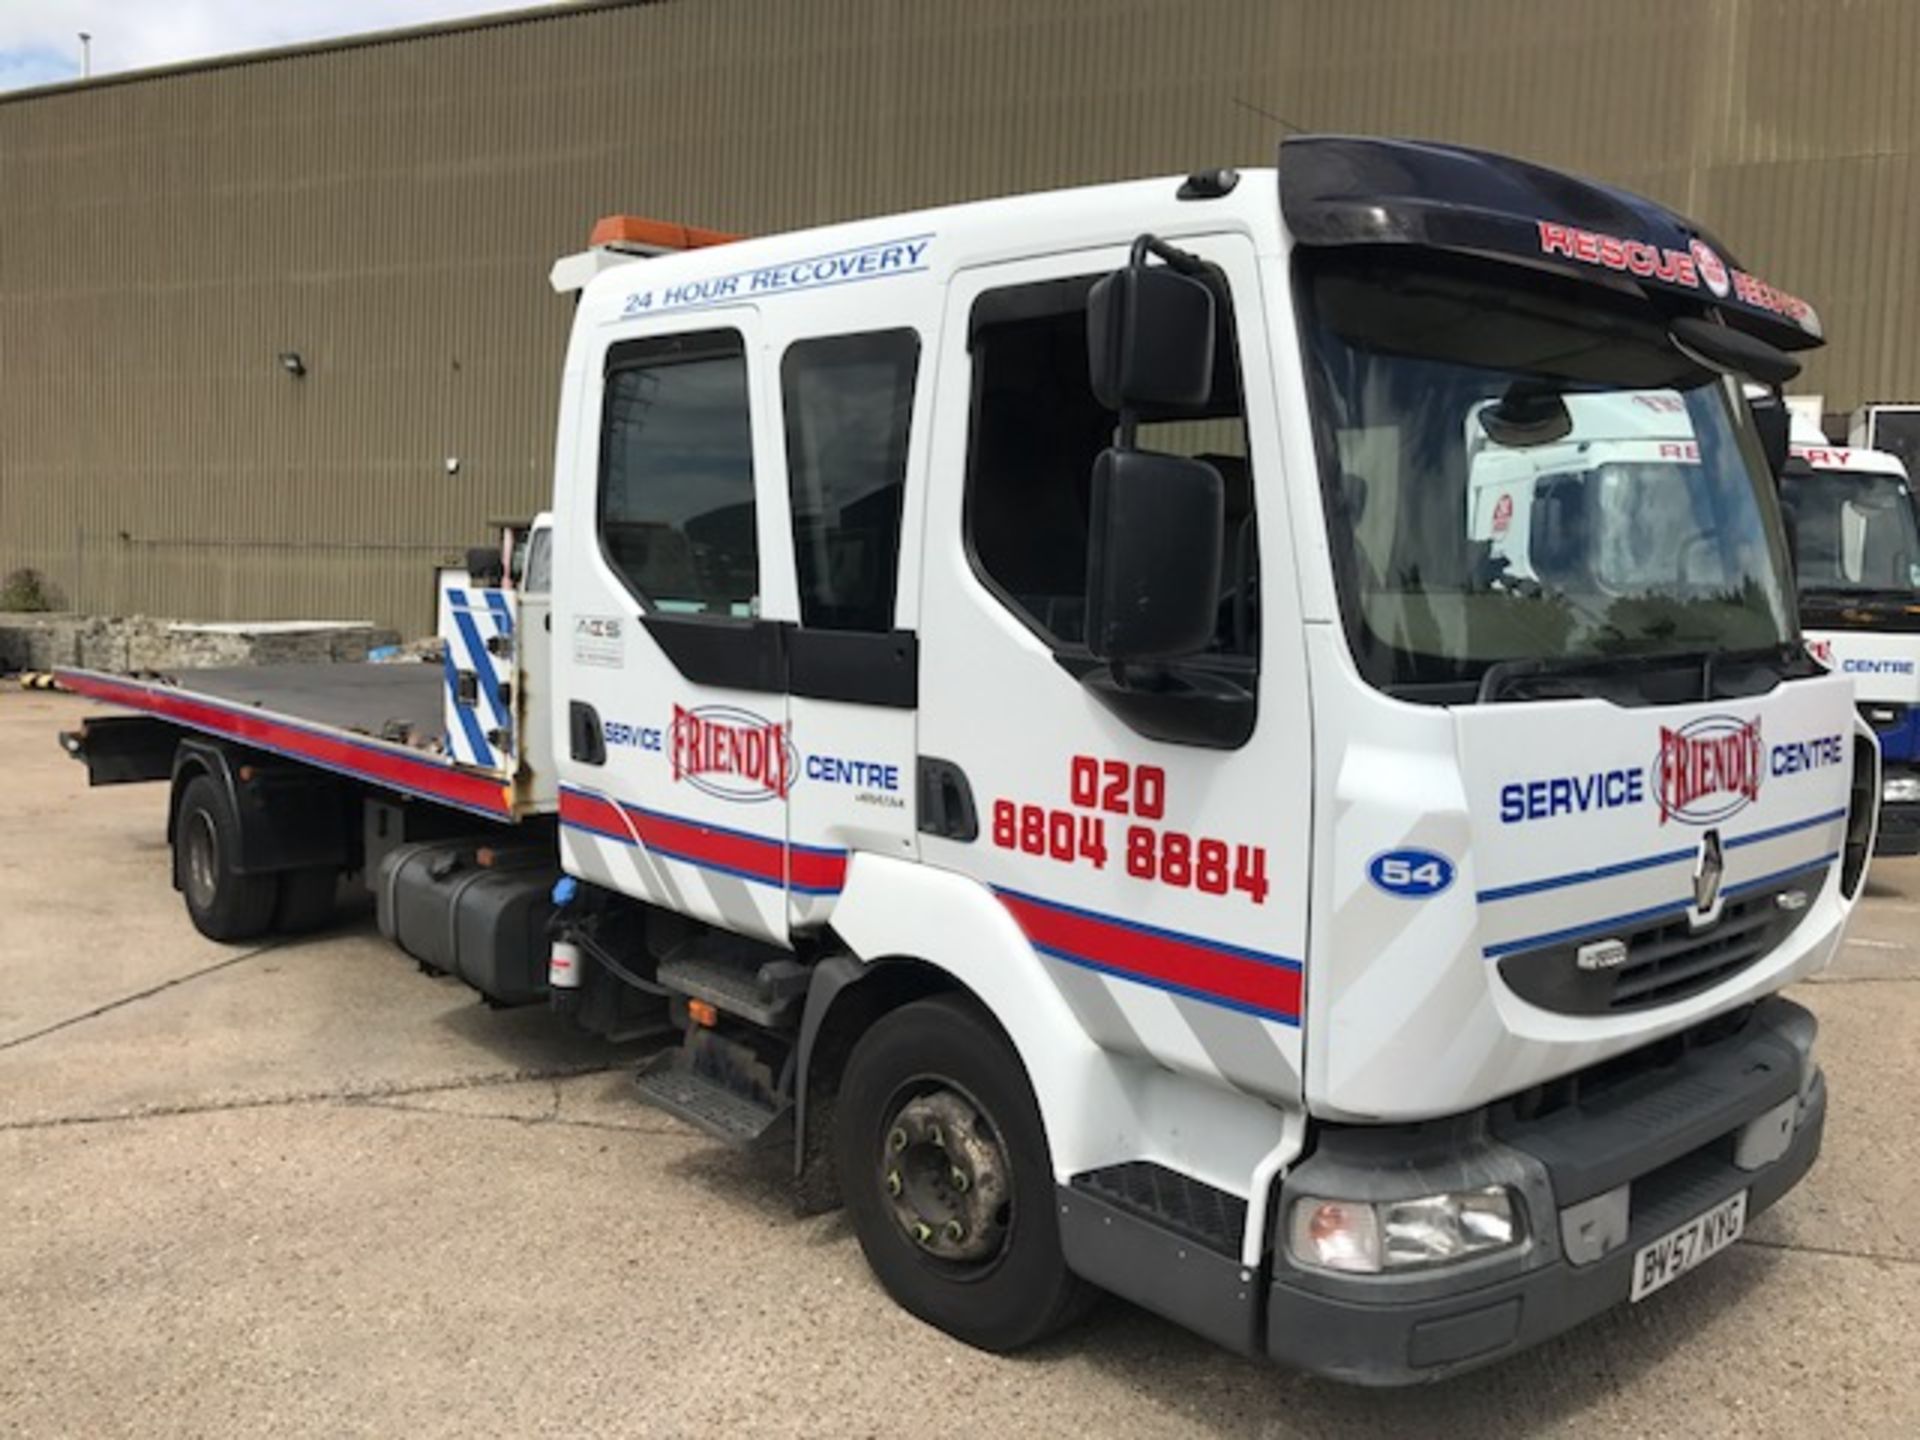 2007 Renault Midlum 10T crew cab breakdown recovery vehiclecomplete with Roger Dyson Group body,